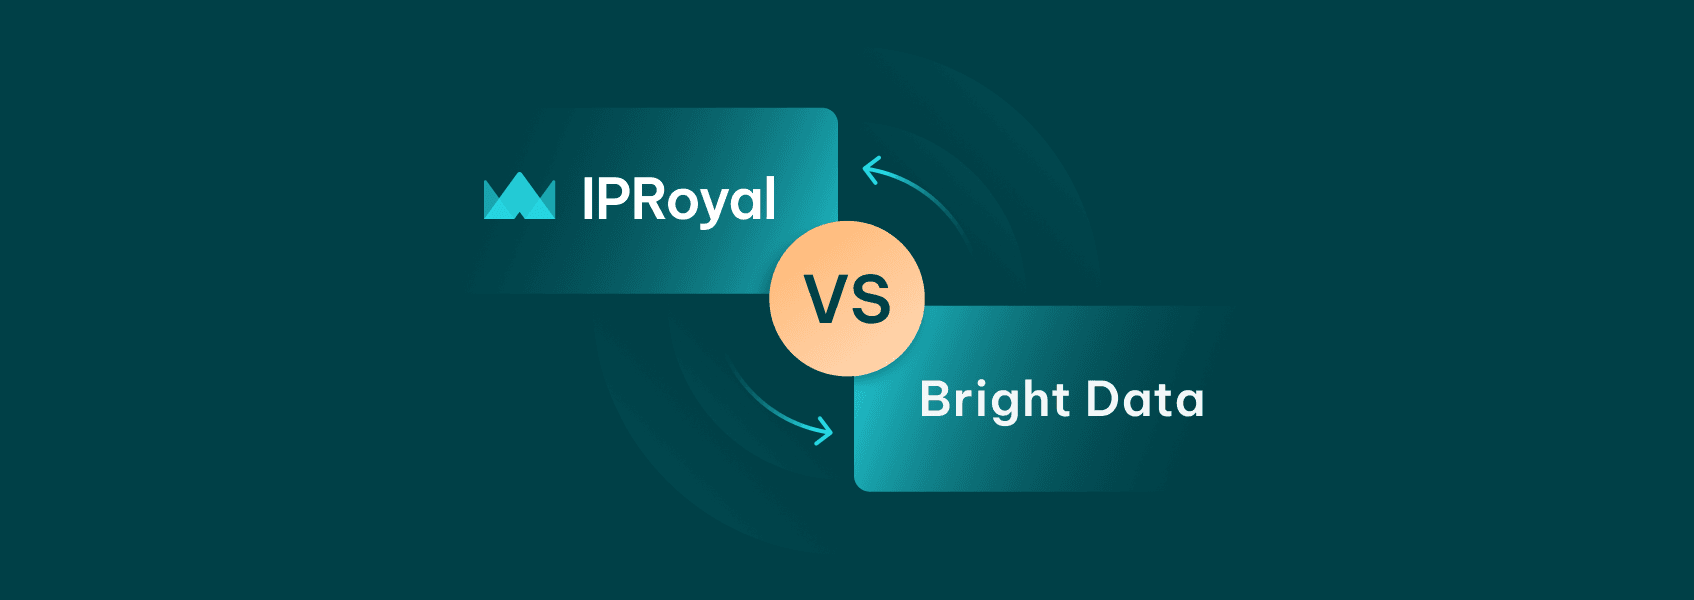 IPRoyal vs. Bright Data – An In-depth Feature Comparison